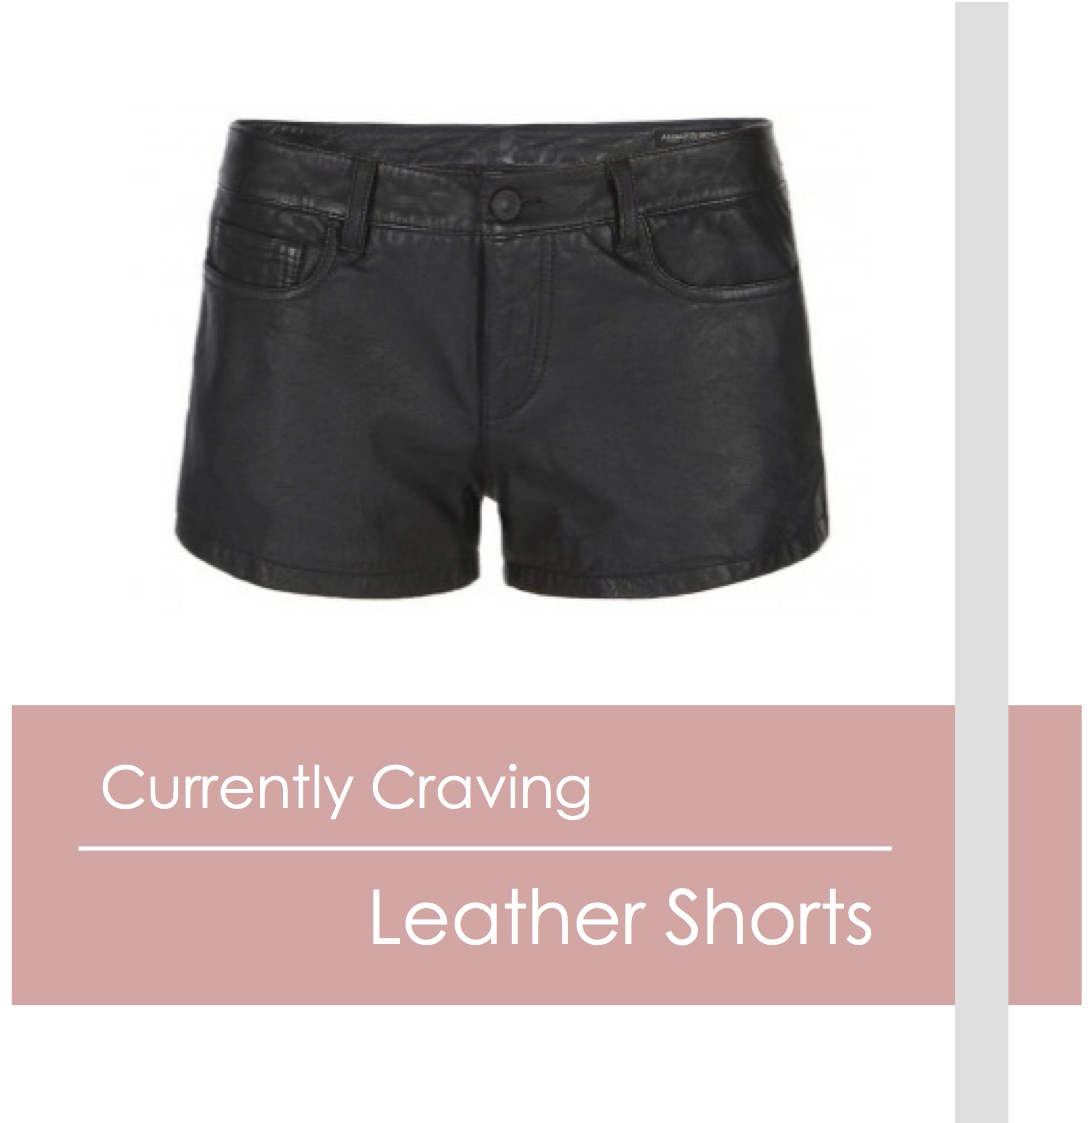 Currently Craving: Leather Shorts